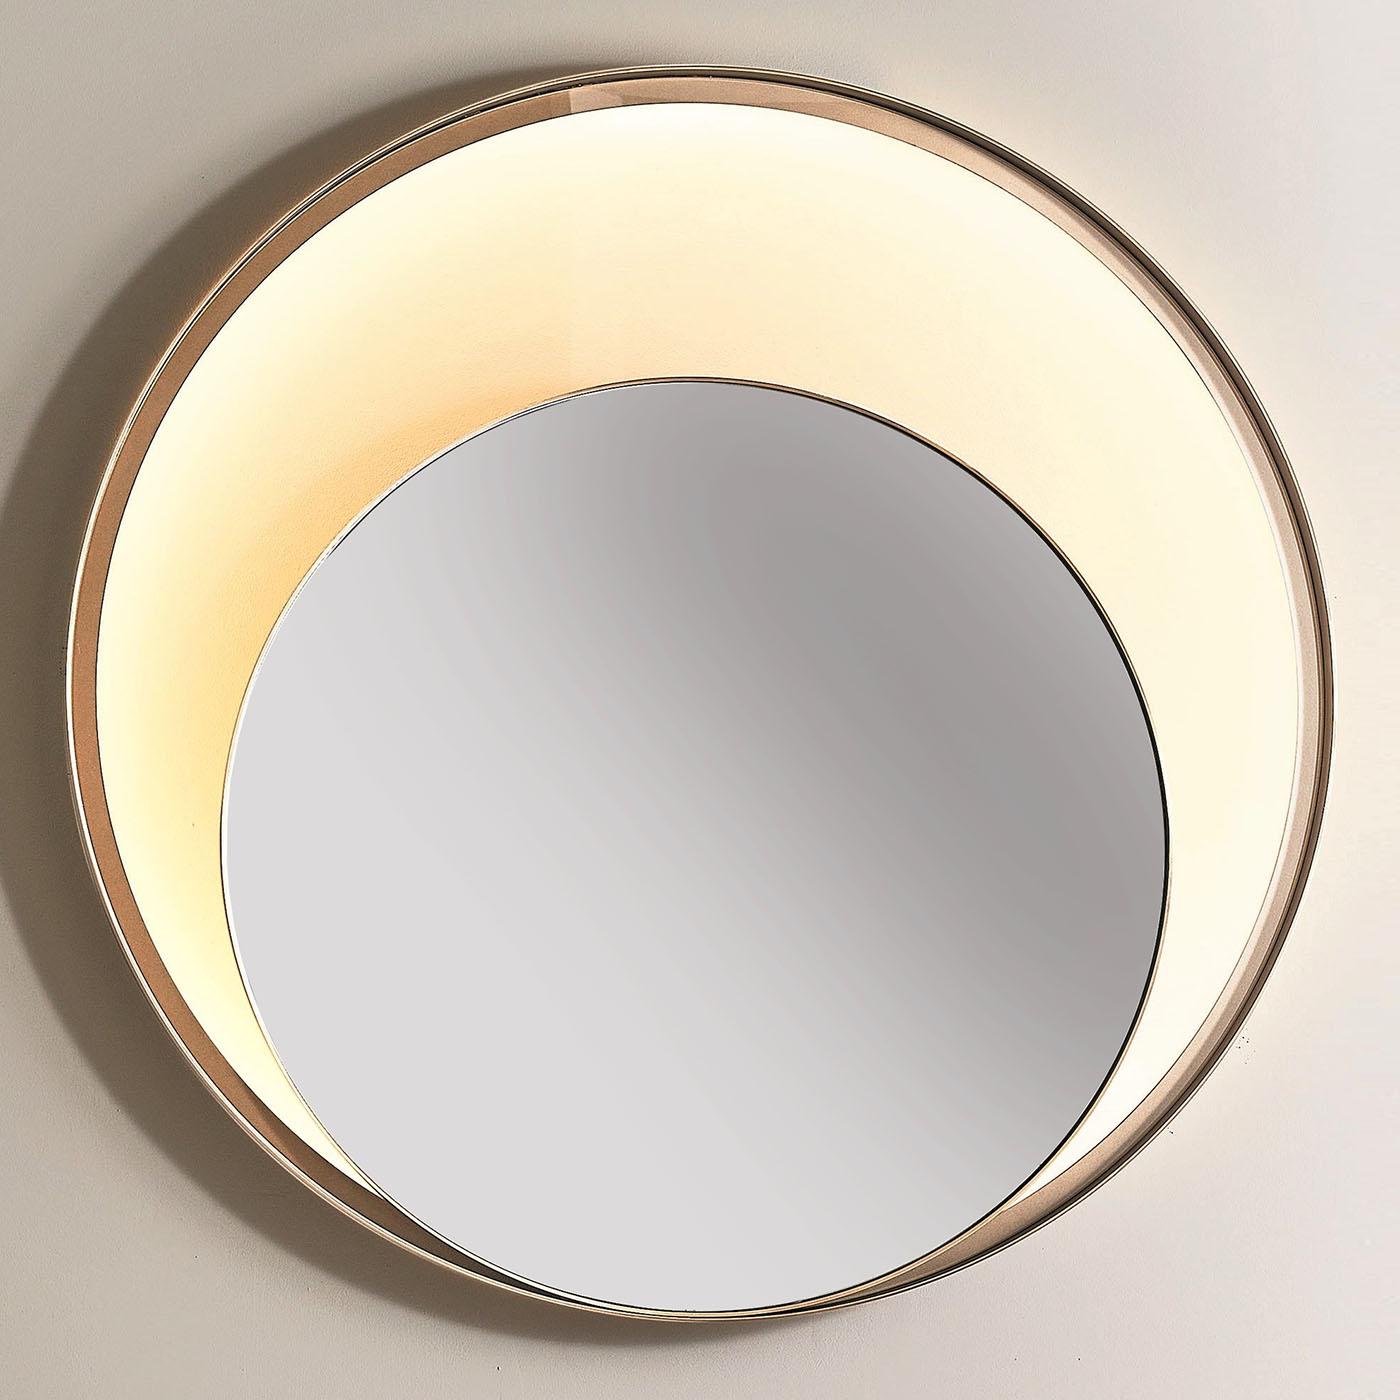 Mirror ringy large or medium mirror with solid brass
ring in bronze finish, with round mirror glass and with
Led backlights. 
Ringy large mirror, diameter 120cm, price: 7900,00€.
Also available on request in:
Ringy medium mirror, diameter 80cm,